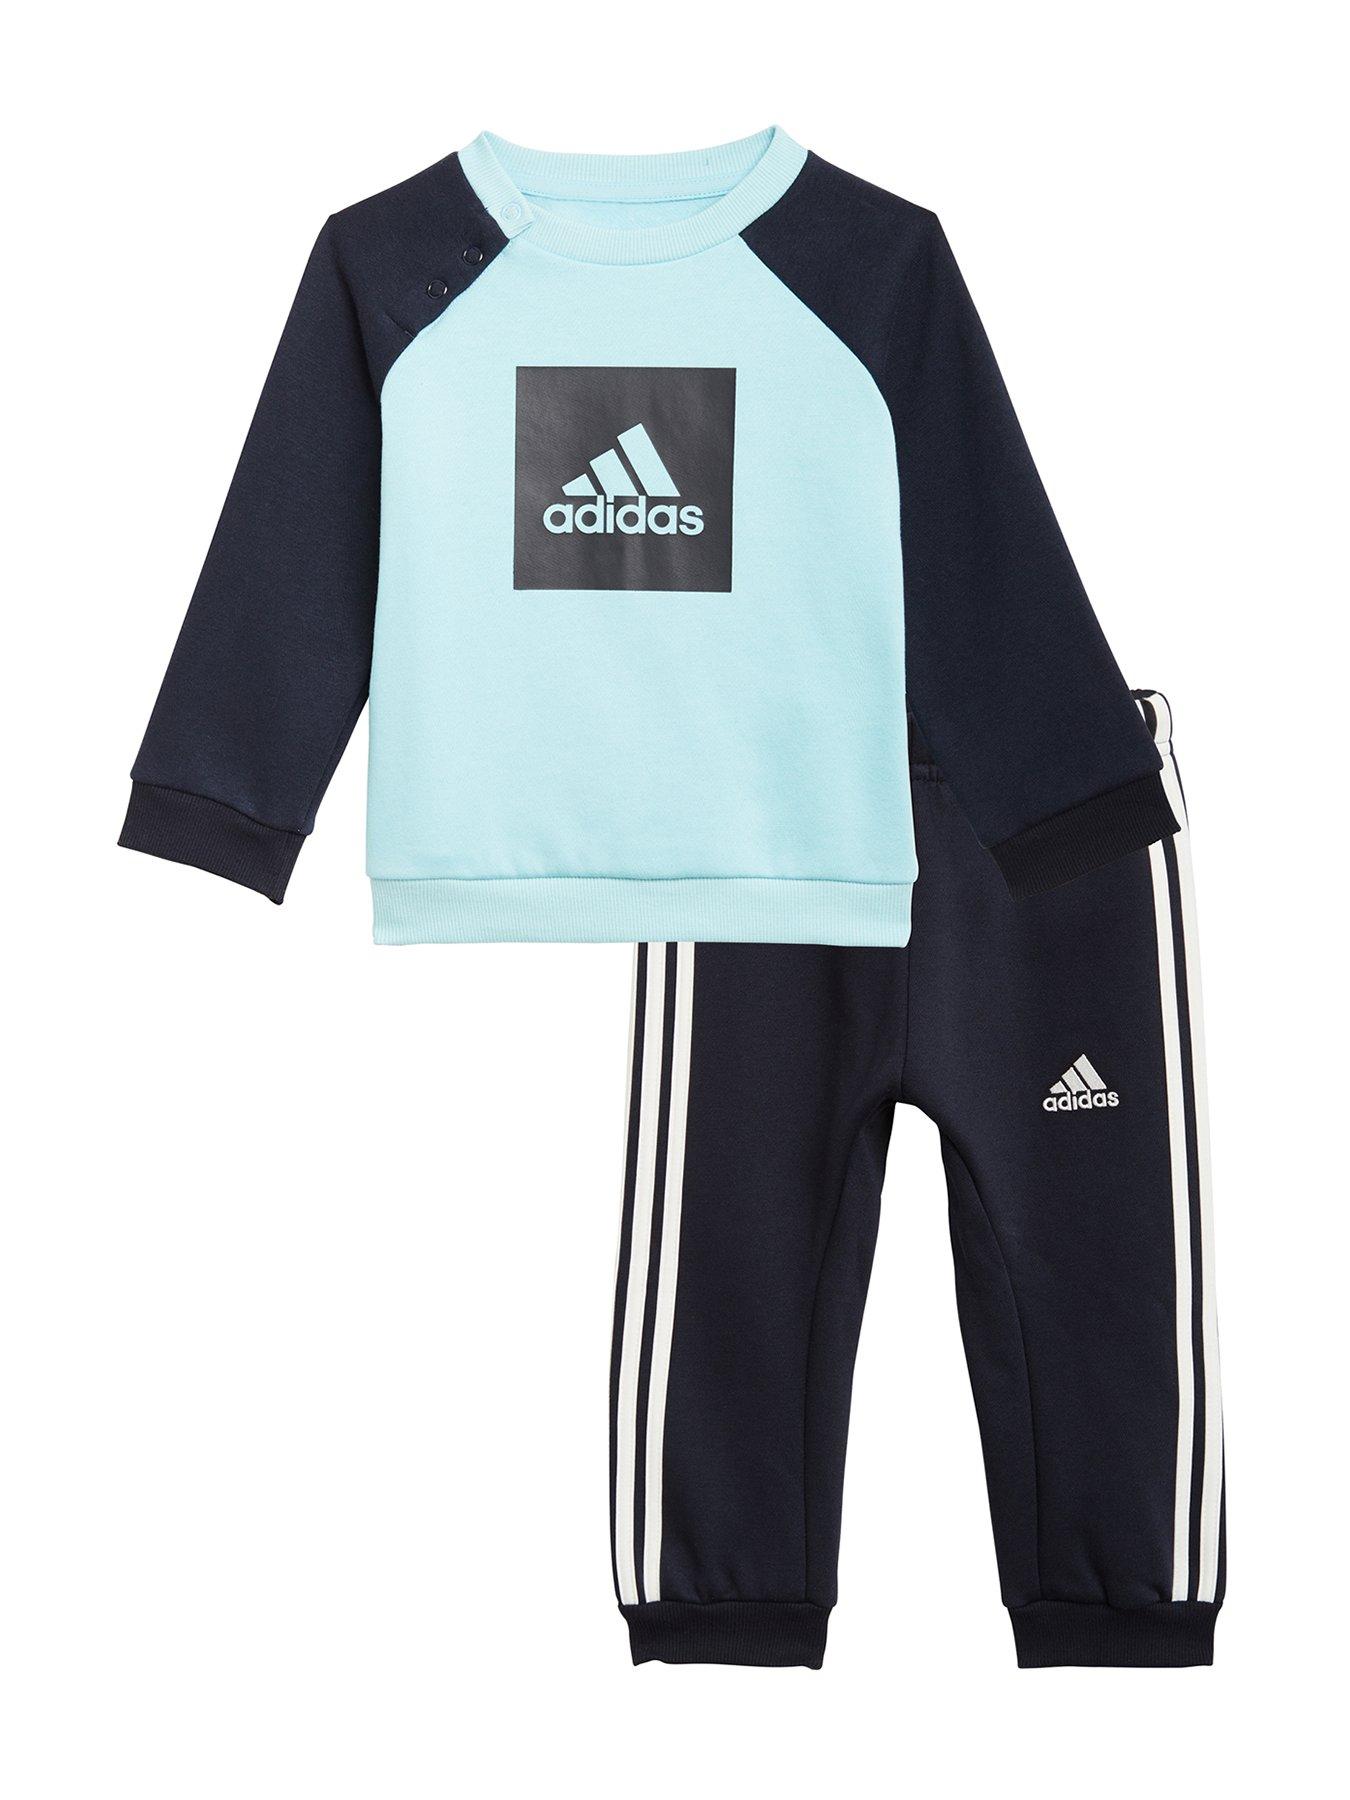 infant boy adidas outfits